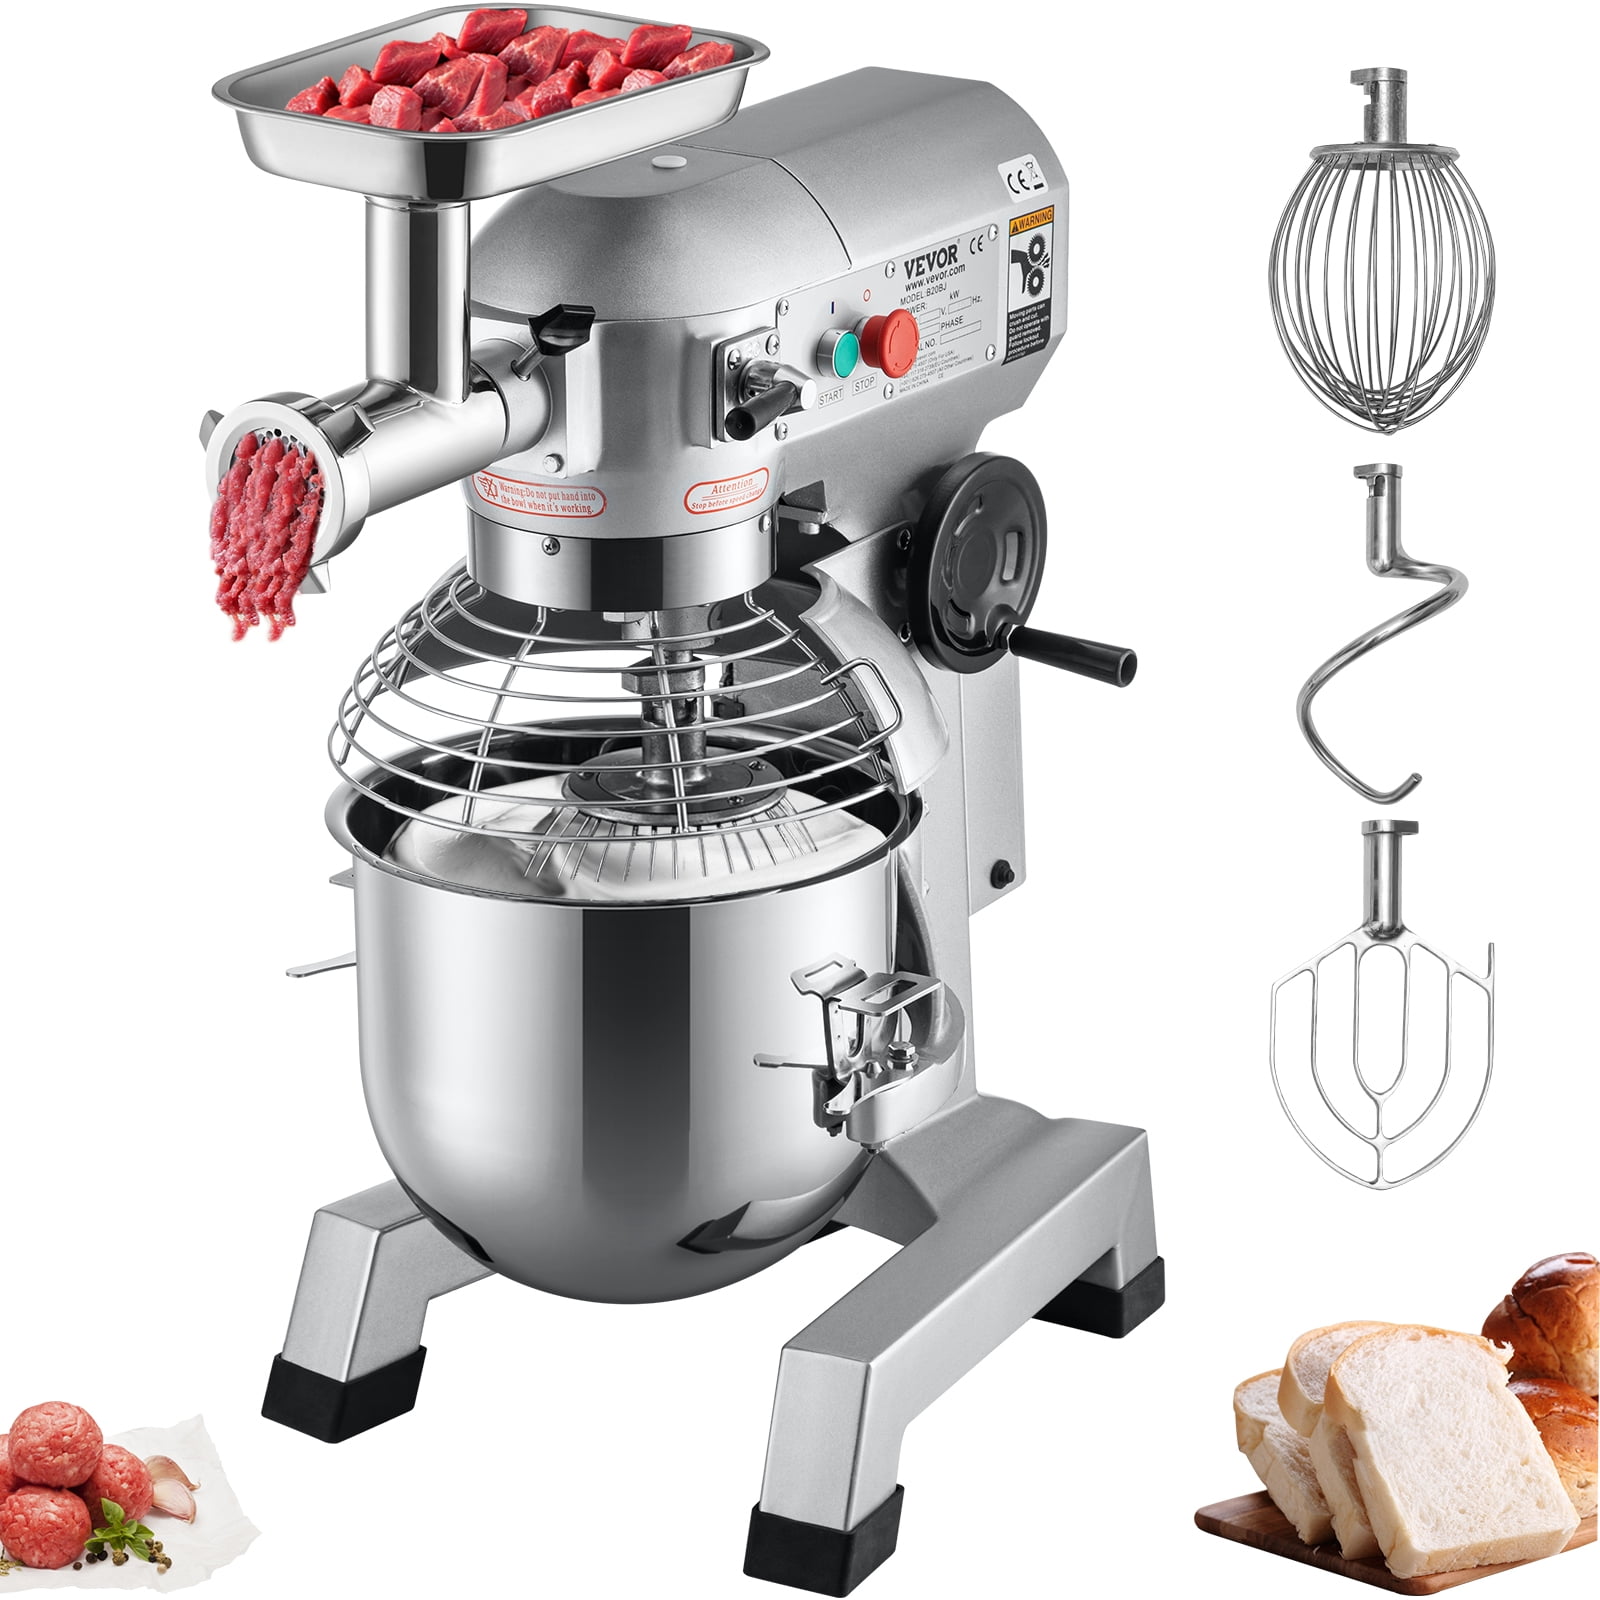 CLEARANCE‼ VEVOR 4 in 1 Multifunctional Stand Mixer - Kitchen